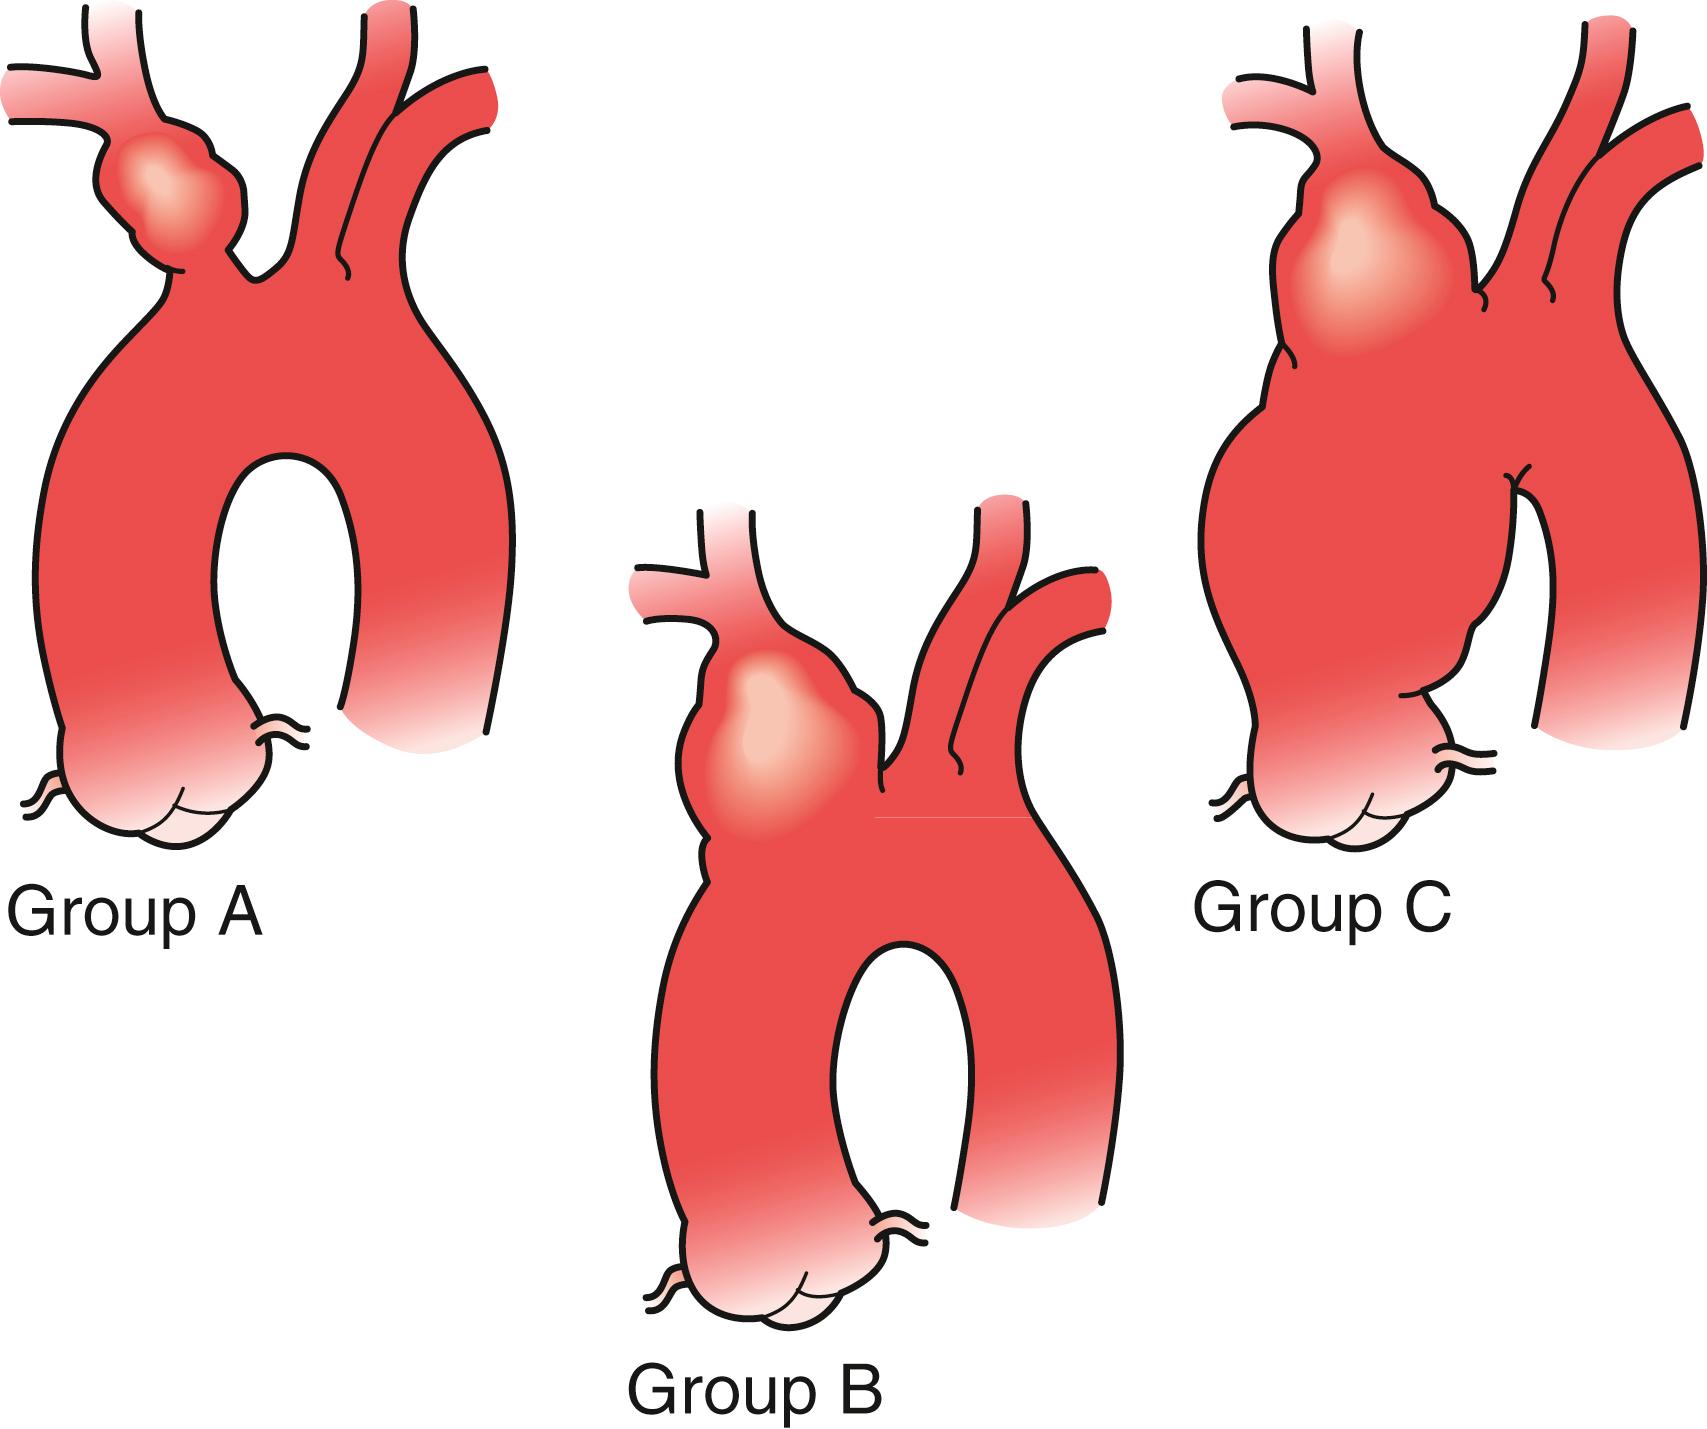 Figure 86.2, Classification of aneurysms of the innominate artery according to extent of involvement. Group A , no involvement of origin of the innominate artery. Group B , involvement of origin of the innominate artery but not of aorta. Group C , involvement of innominate artery and aorta.